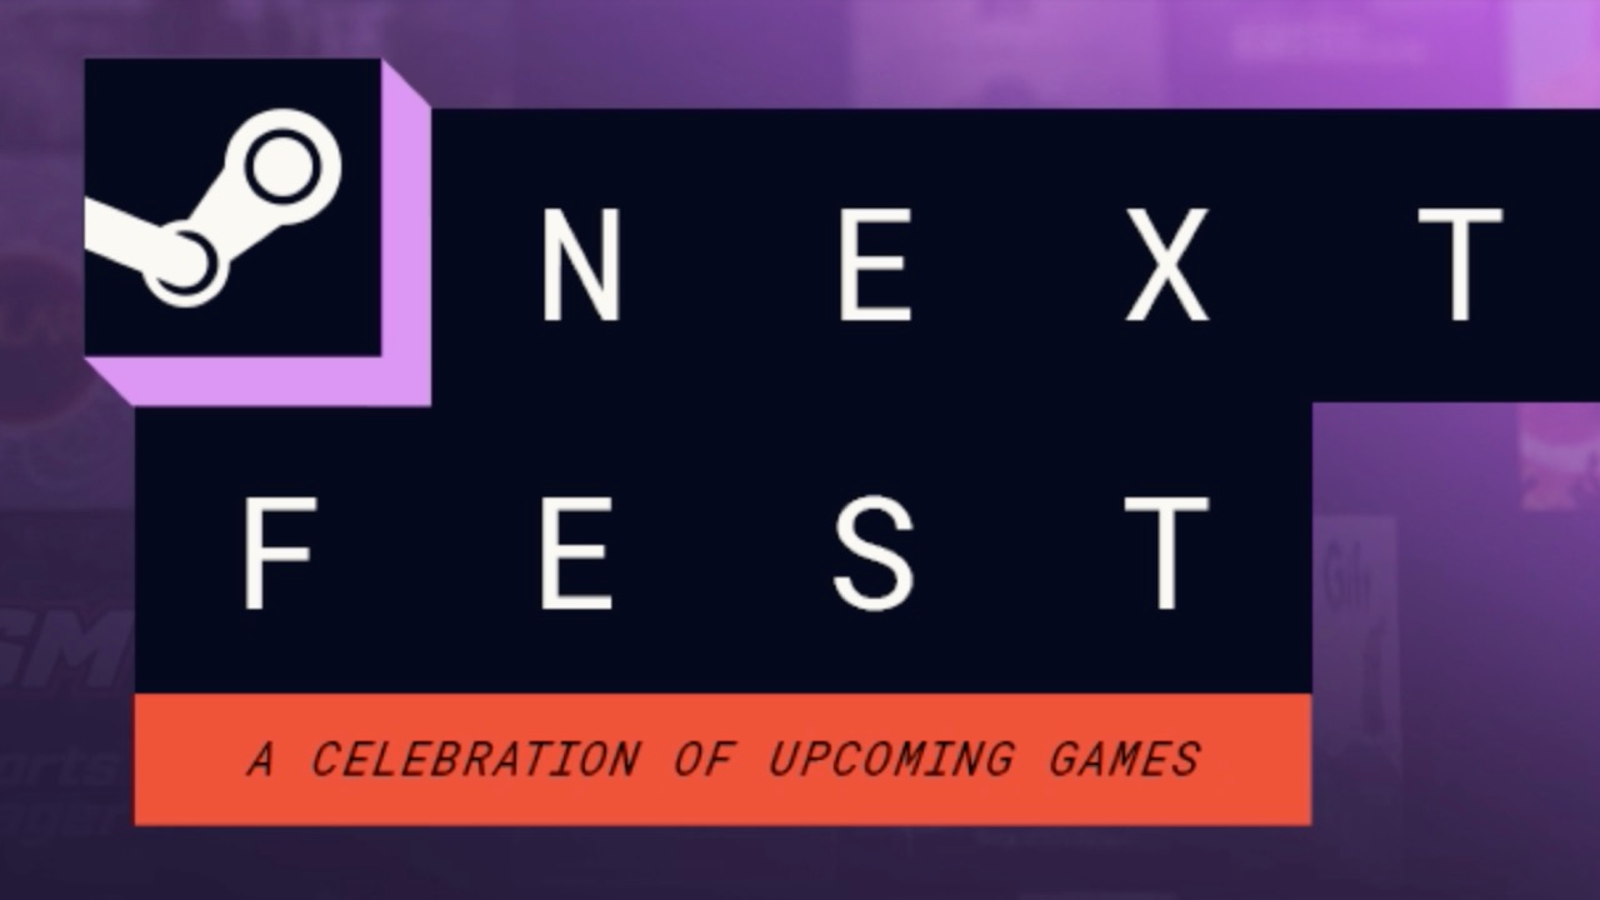 Steam Next Fest is back and underway with "hundreds" of playable PC